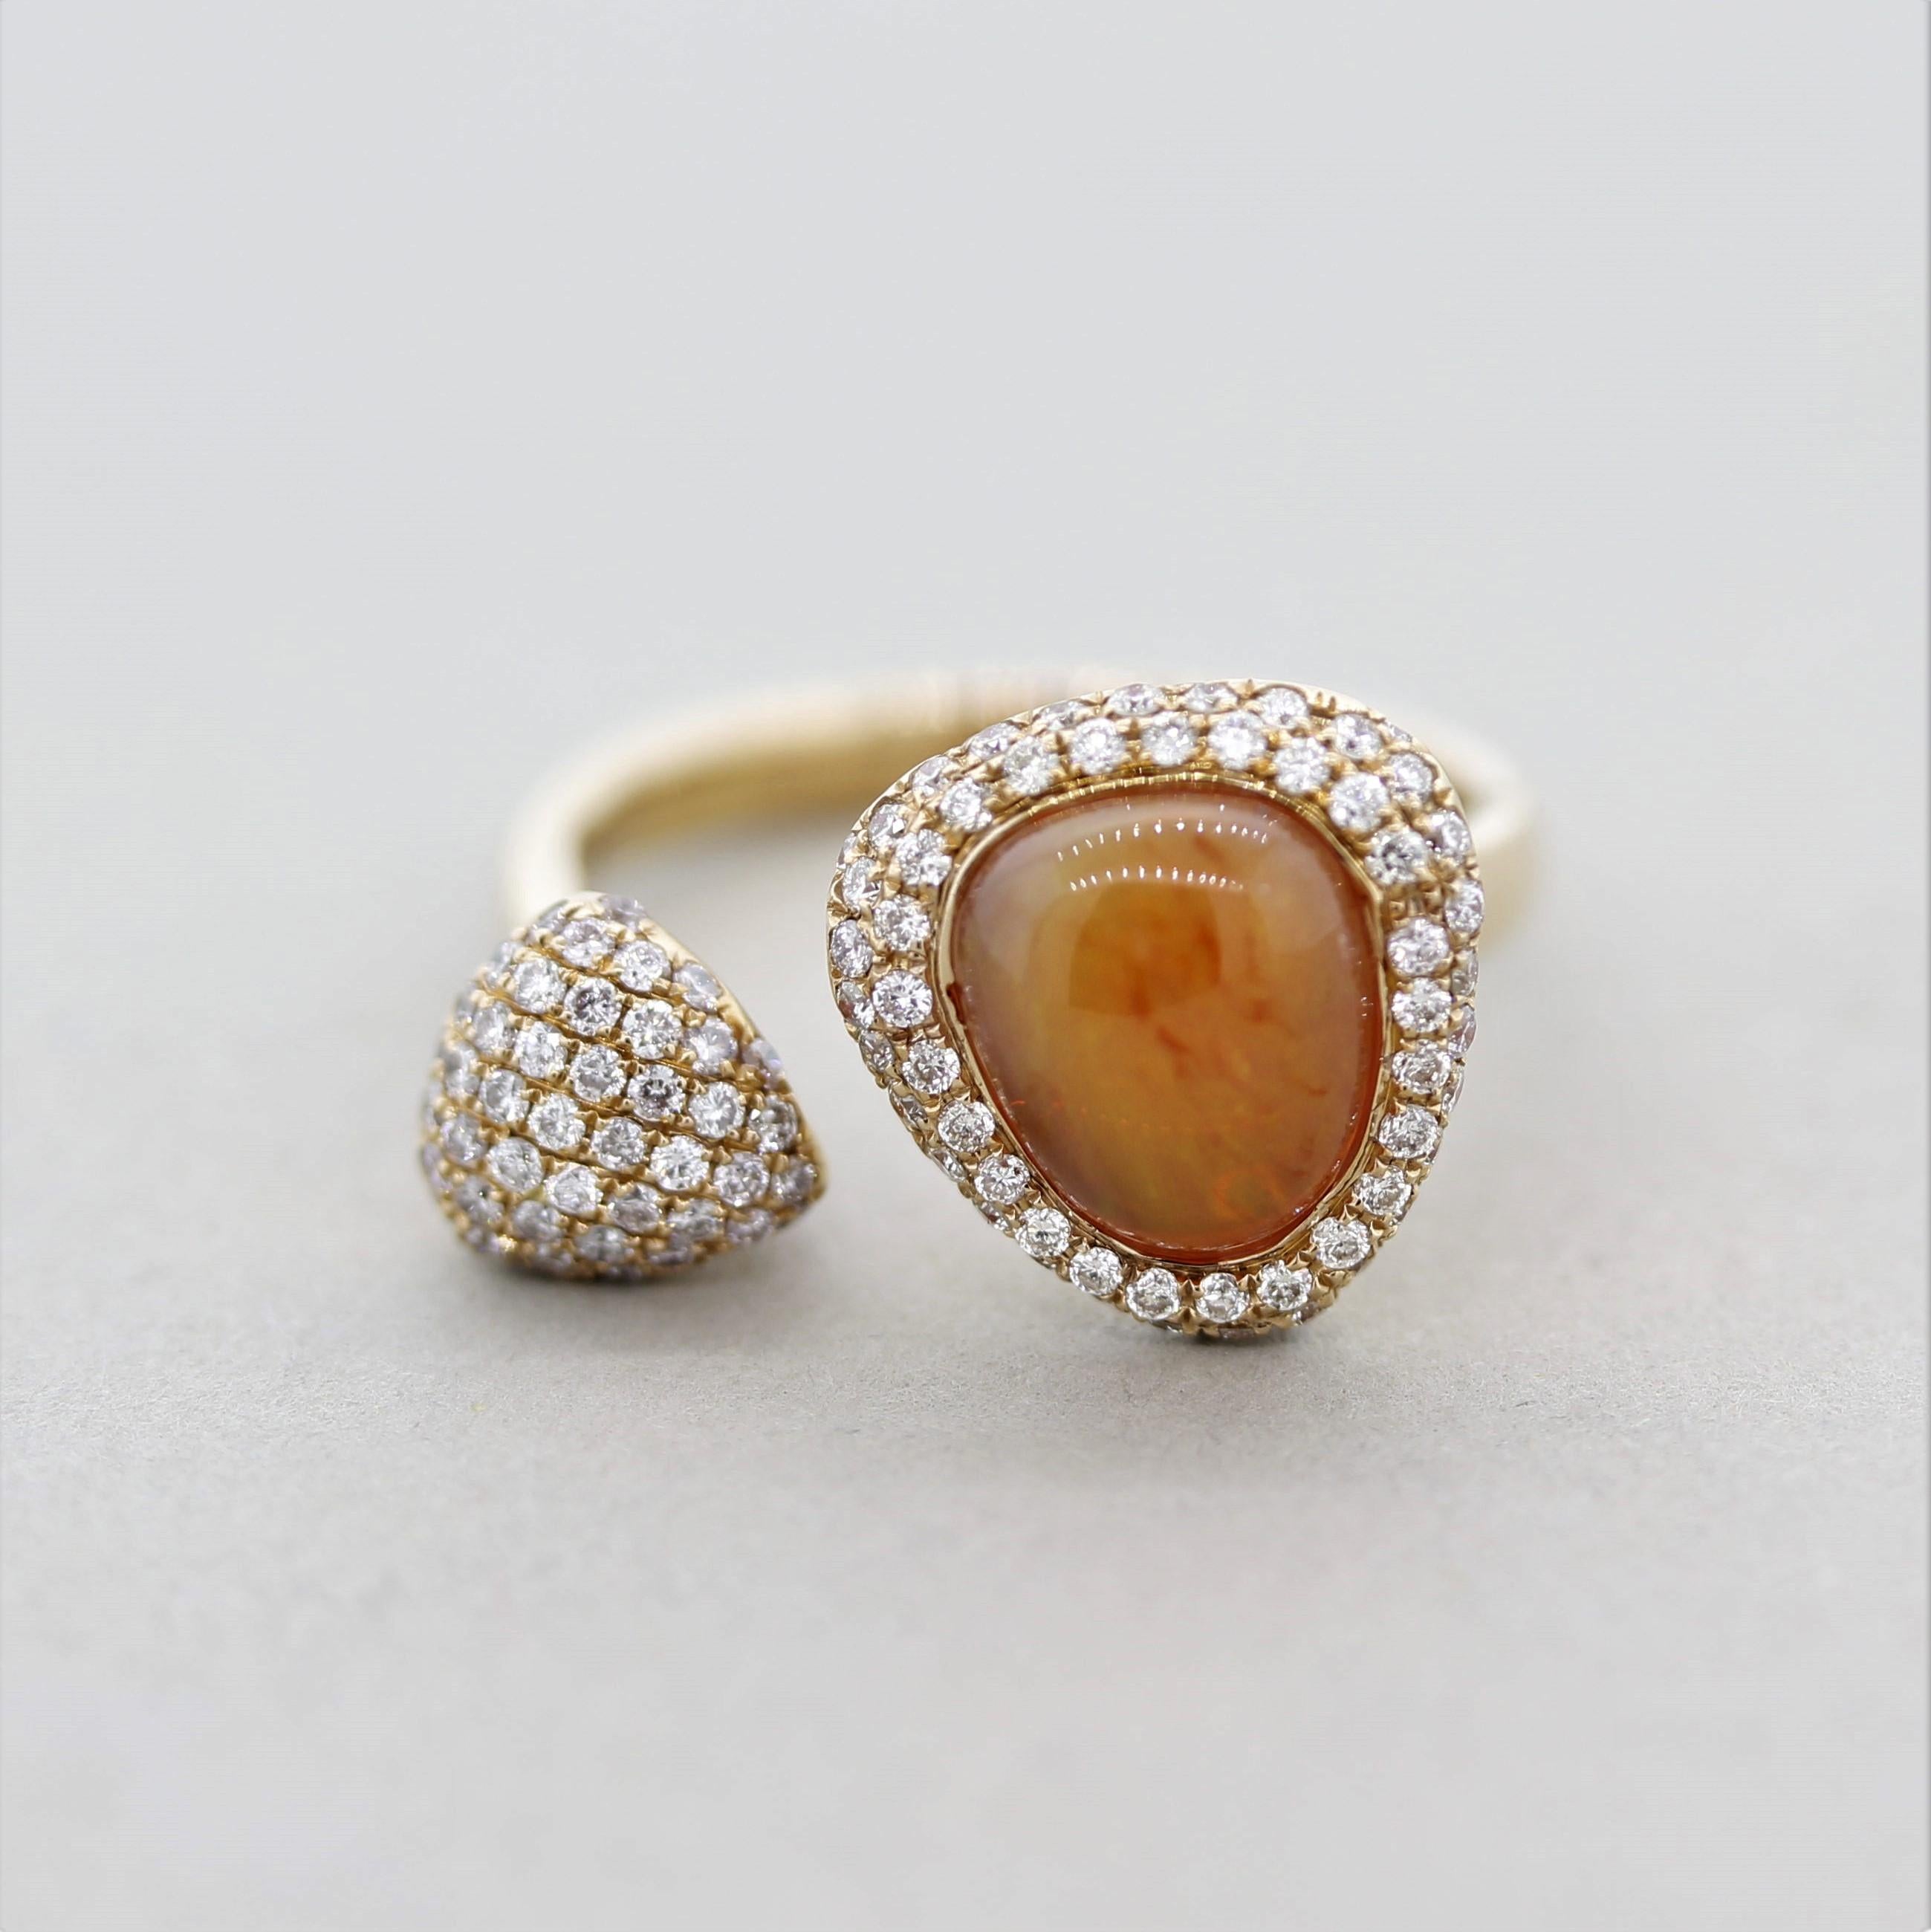 A stylish ring featuring an orange Mexican fire opal weighing 2.52 carats. It is accented by 0.58 carats of round brilliant-cut diamonds which surround the opal as well as the other “twin.” Made in 18k rose gold and ready to be loved!

Ring Size 6.75